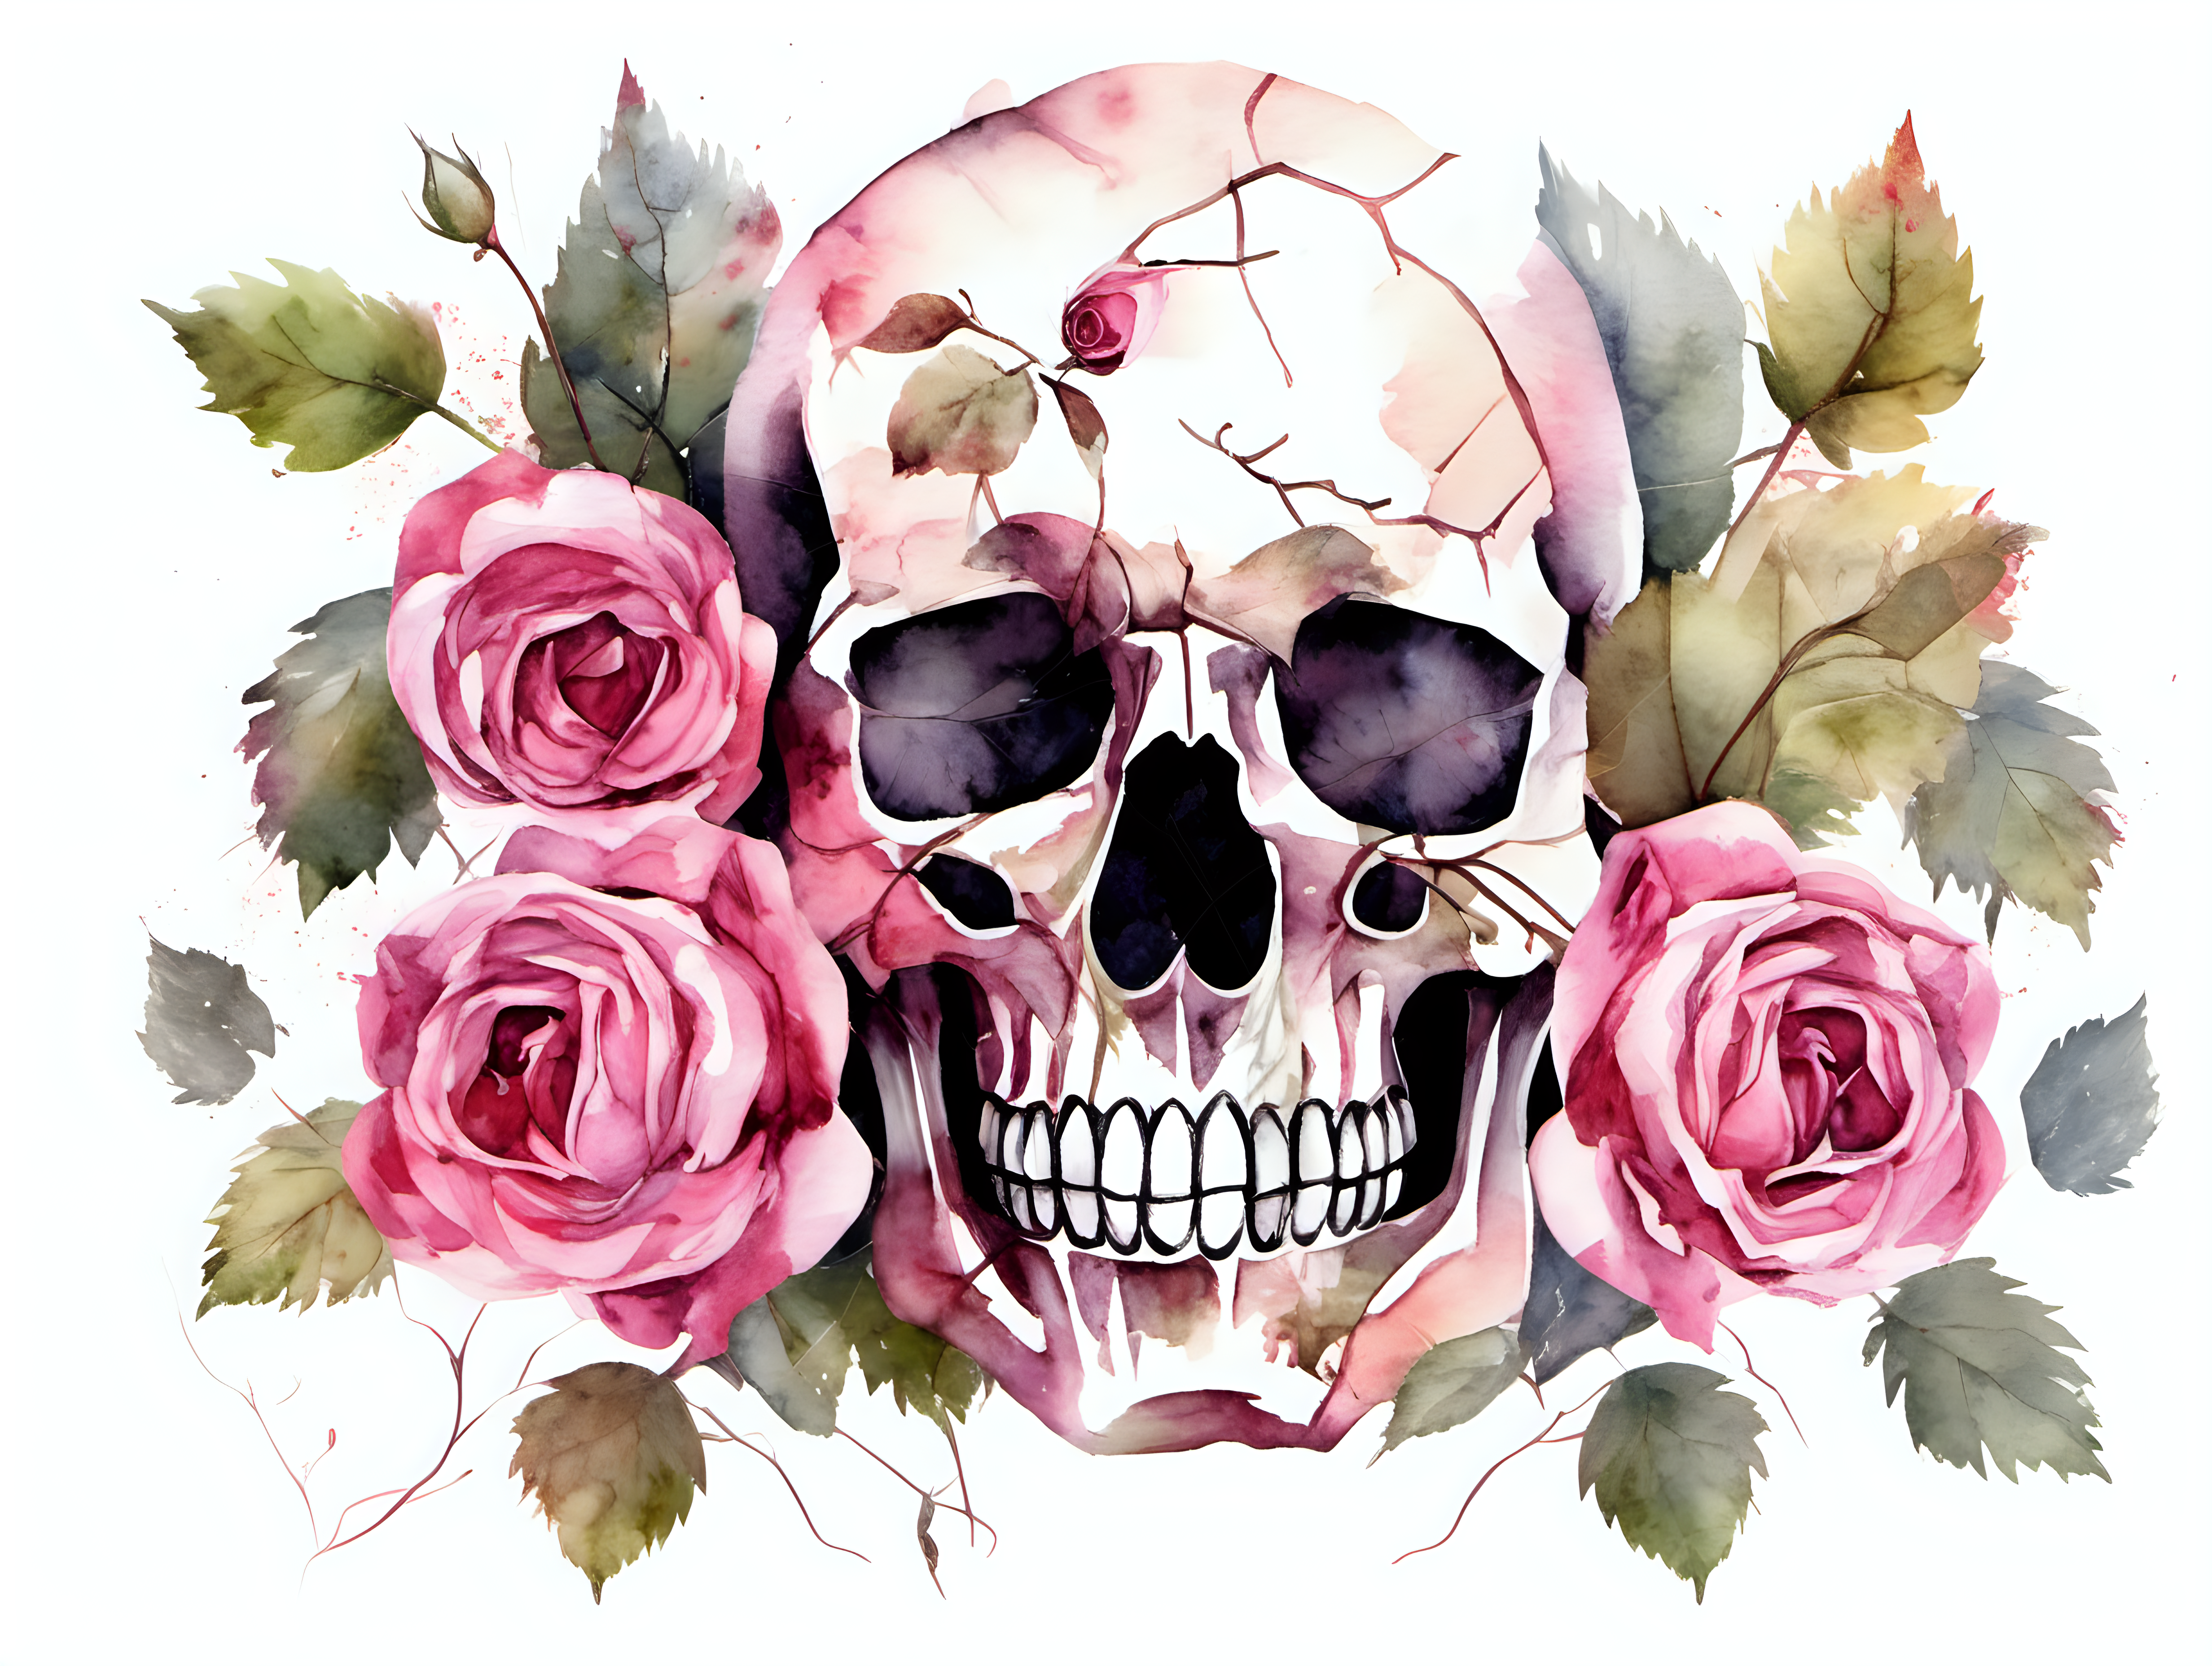 Skull with rose vines in the style of watercolor, on a white background